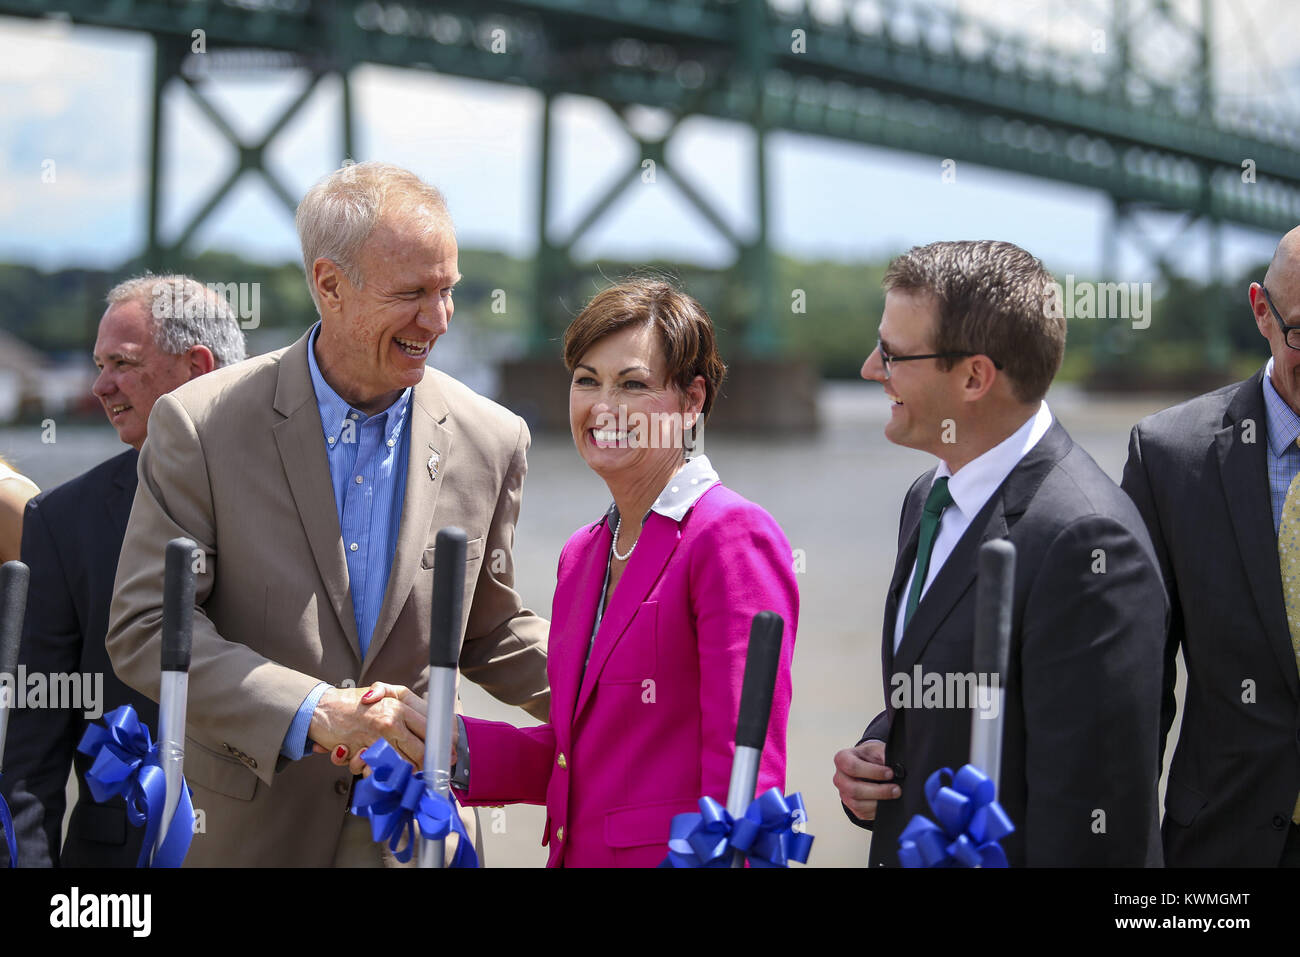 Bettendorf, Iowa, USA. 26th June, 2017. Illinois Gov. Bruce Rauner, left, and Iowa Gov. Kim Reynolds shake hands during the I-74 Bridge Reconstruction Groundbreaking at Leach Park in Bettendorf on Monday, June 26, 2017. Credit: Andy Abeyta, Quad-City Times/Quad-City Times/ZUMA Wire/Alamy Live News Stock Photo